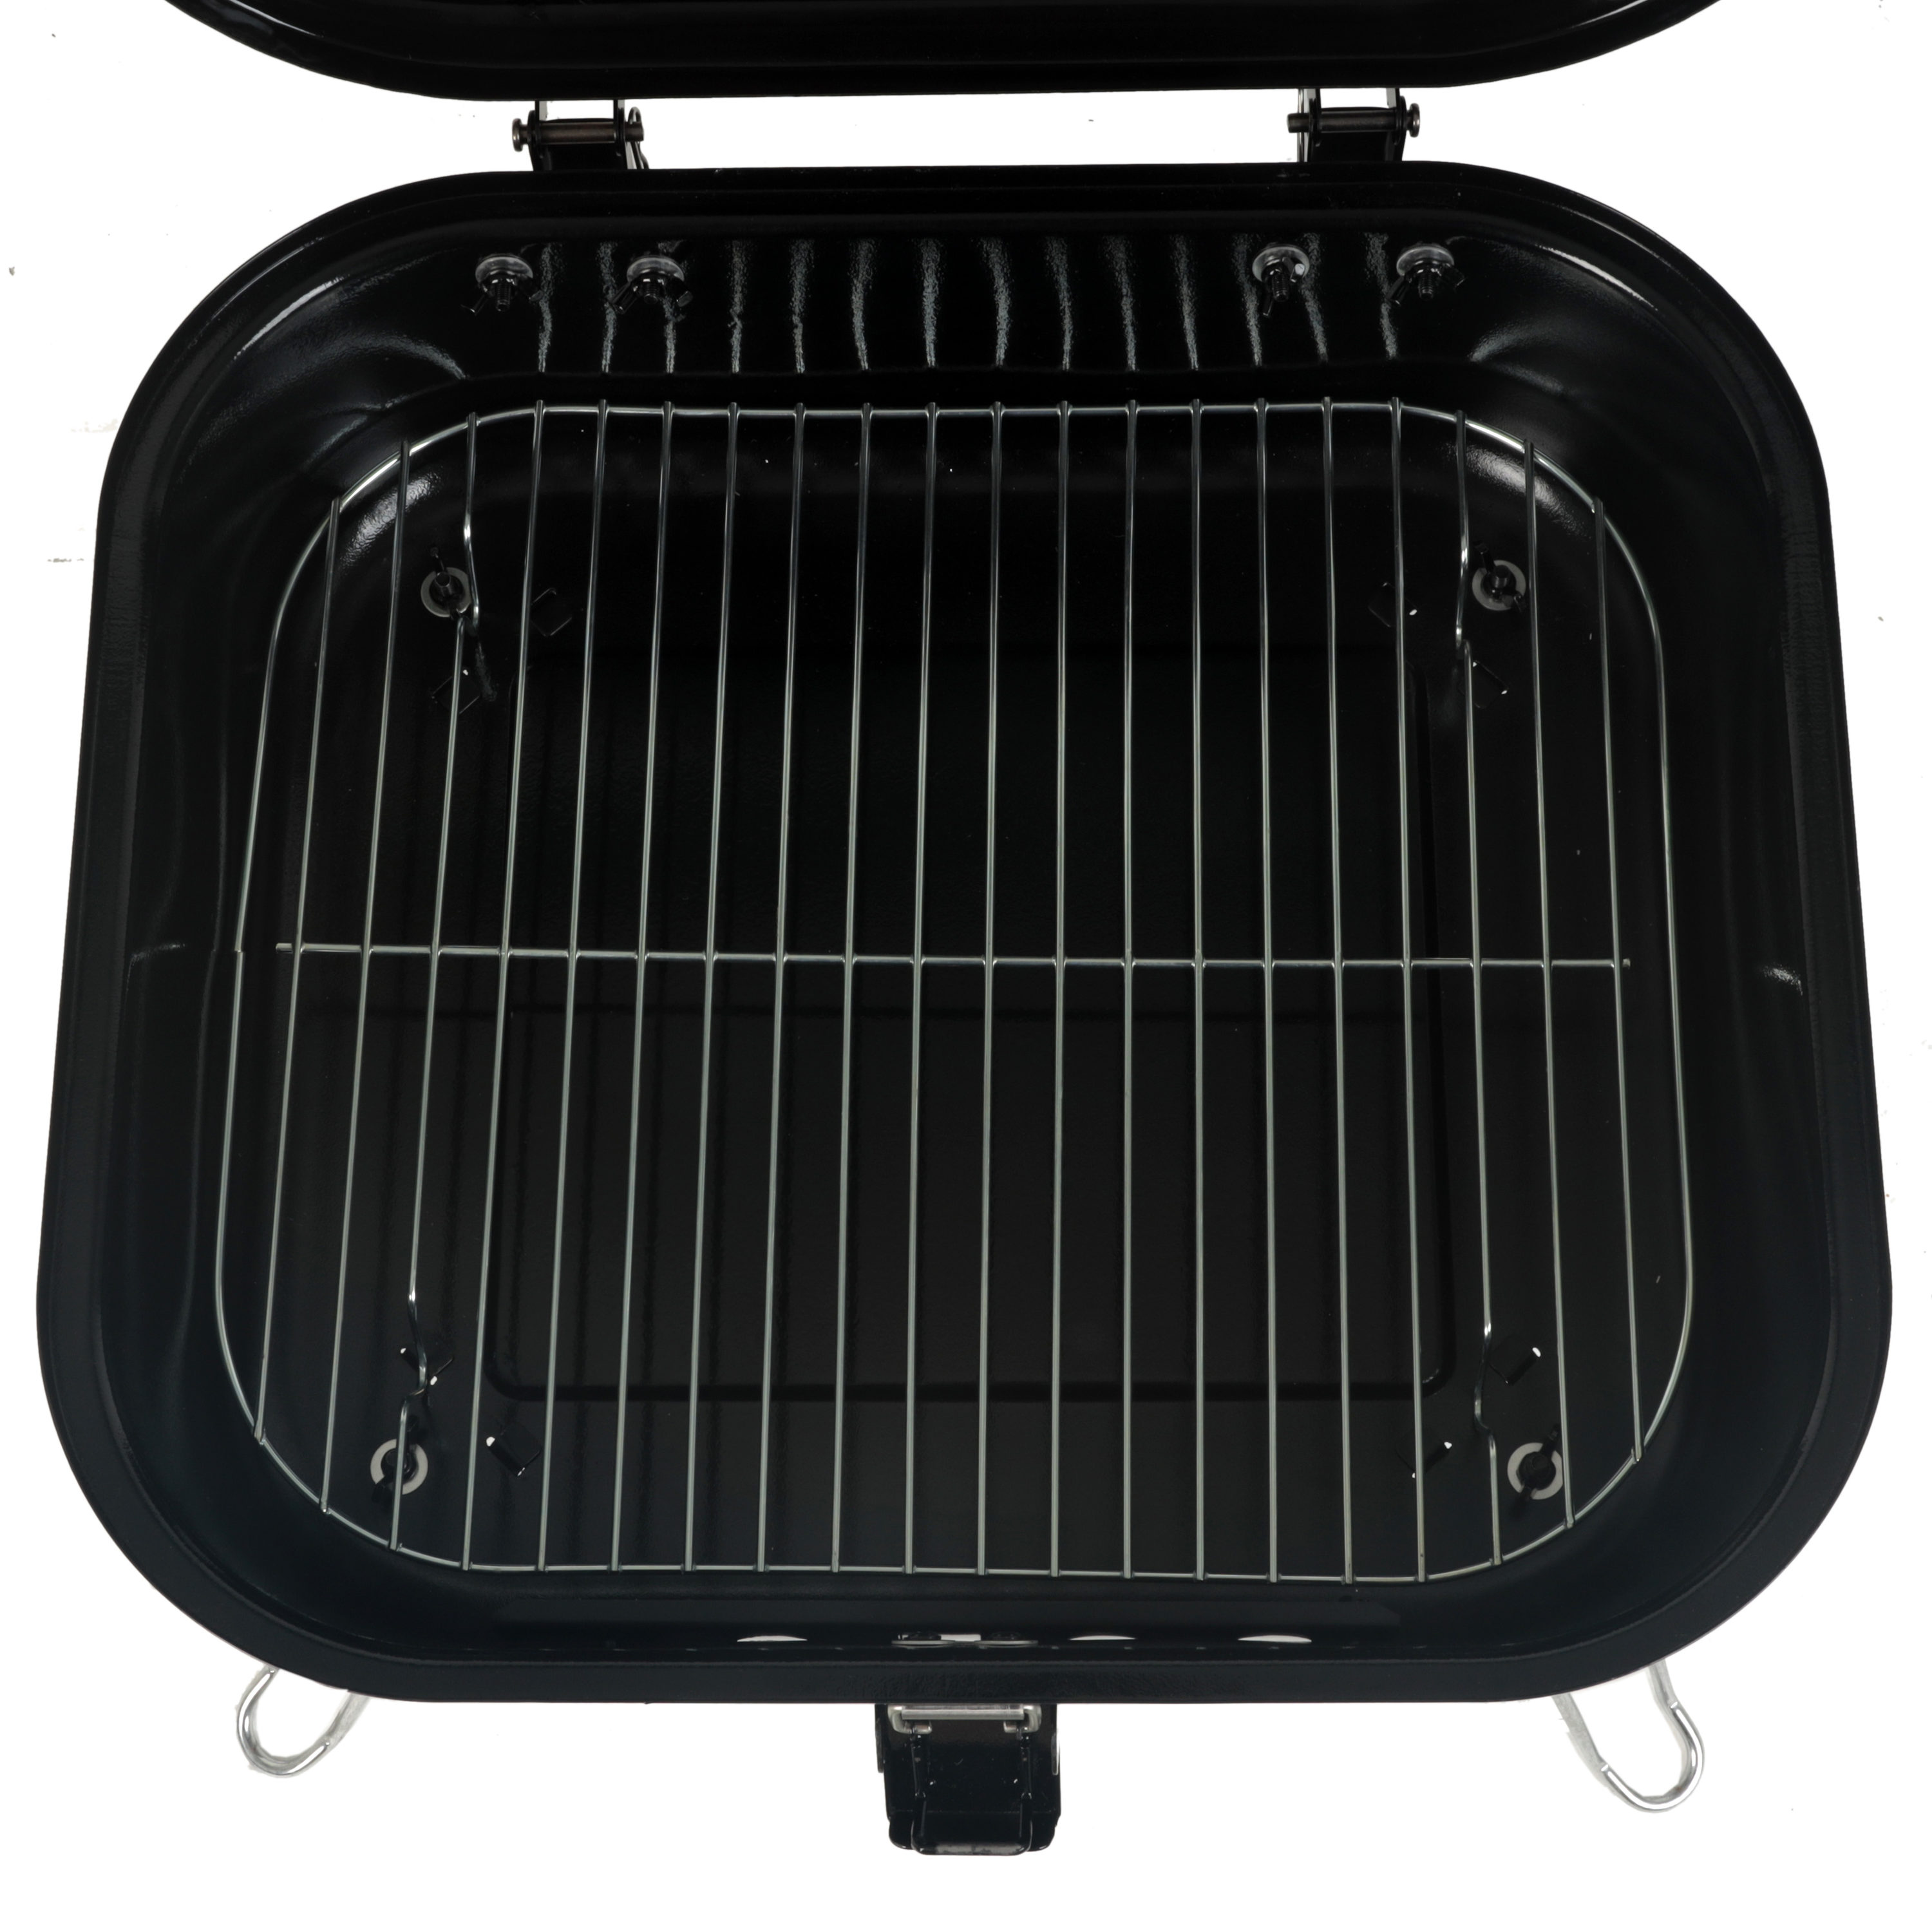 MF Studio 34'' Charcoal Grill Extra Large Portable BBQ Grill, Black